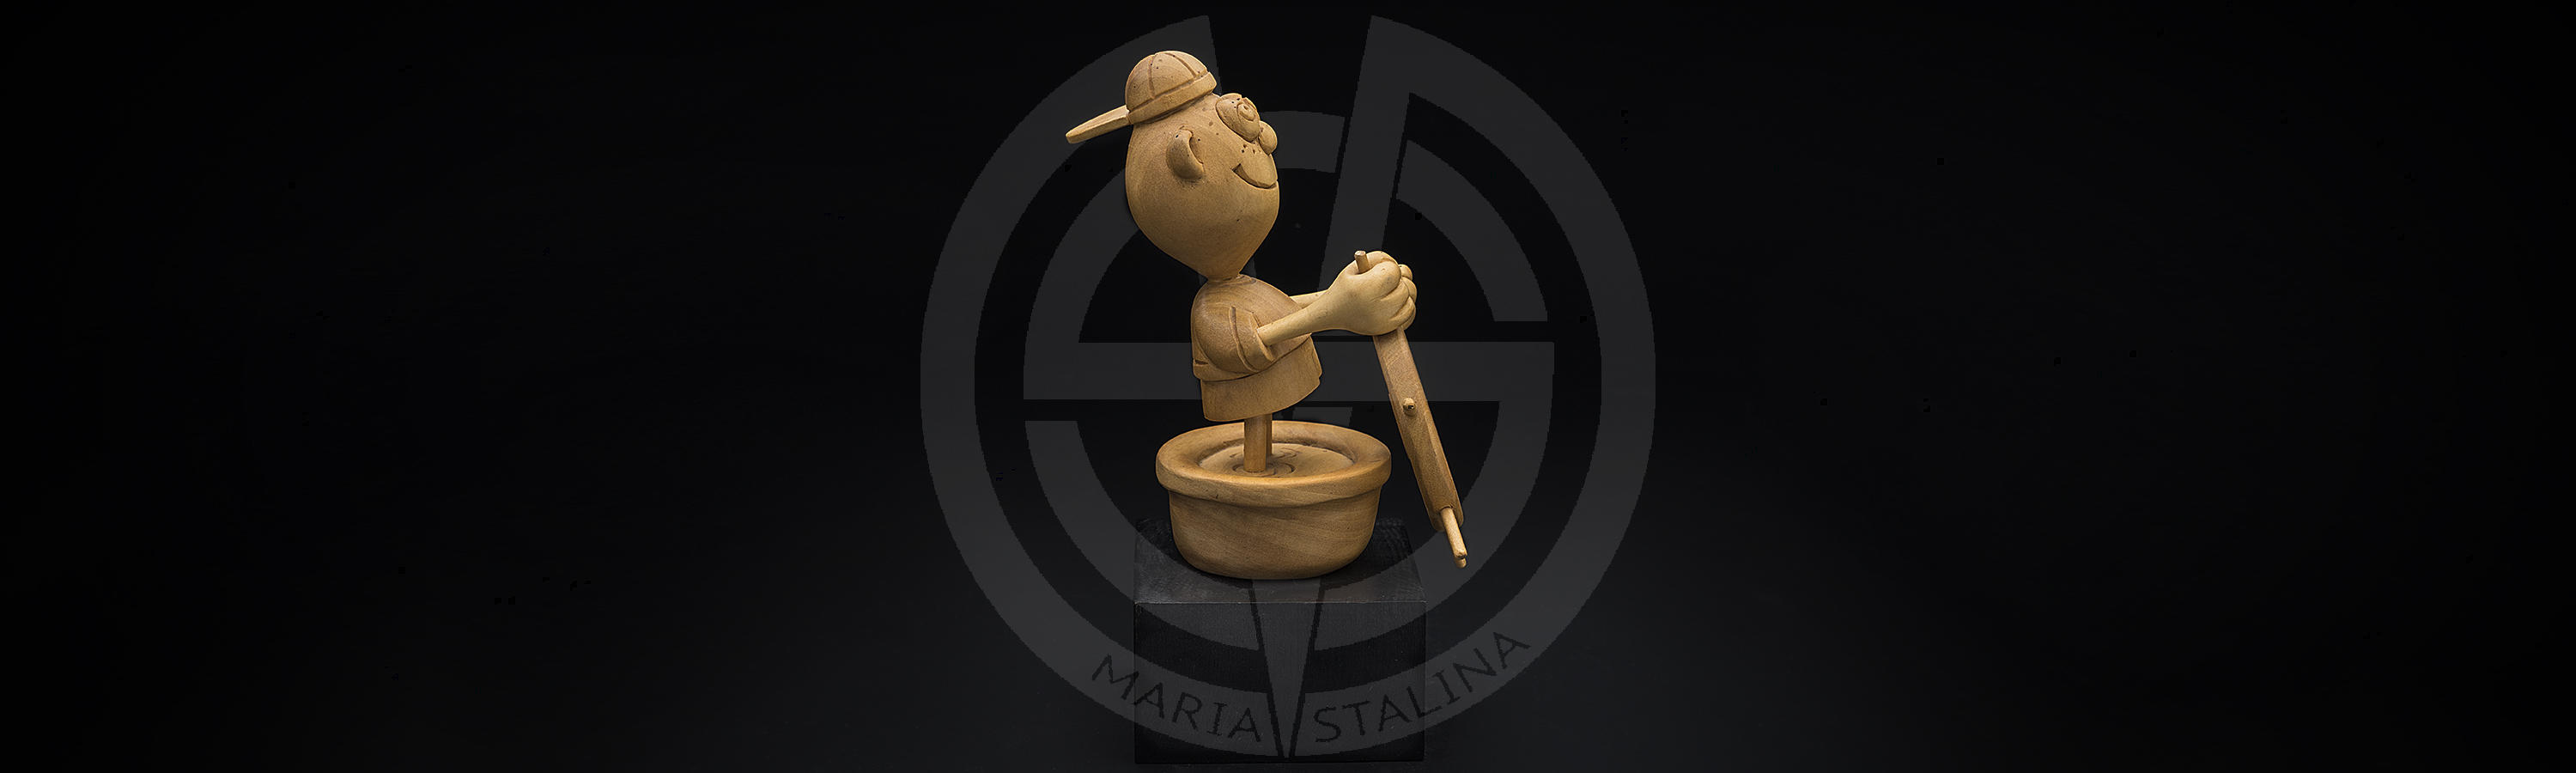 Handcrafted statuette